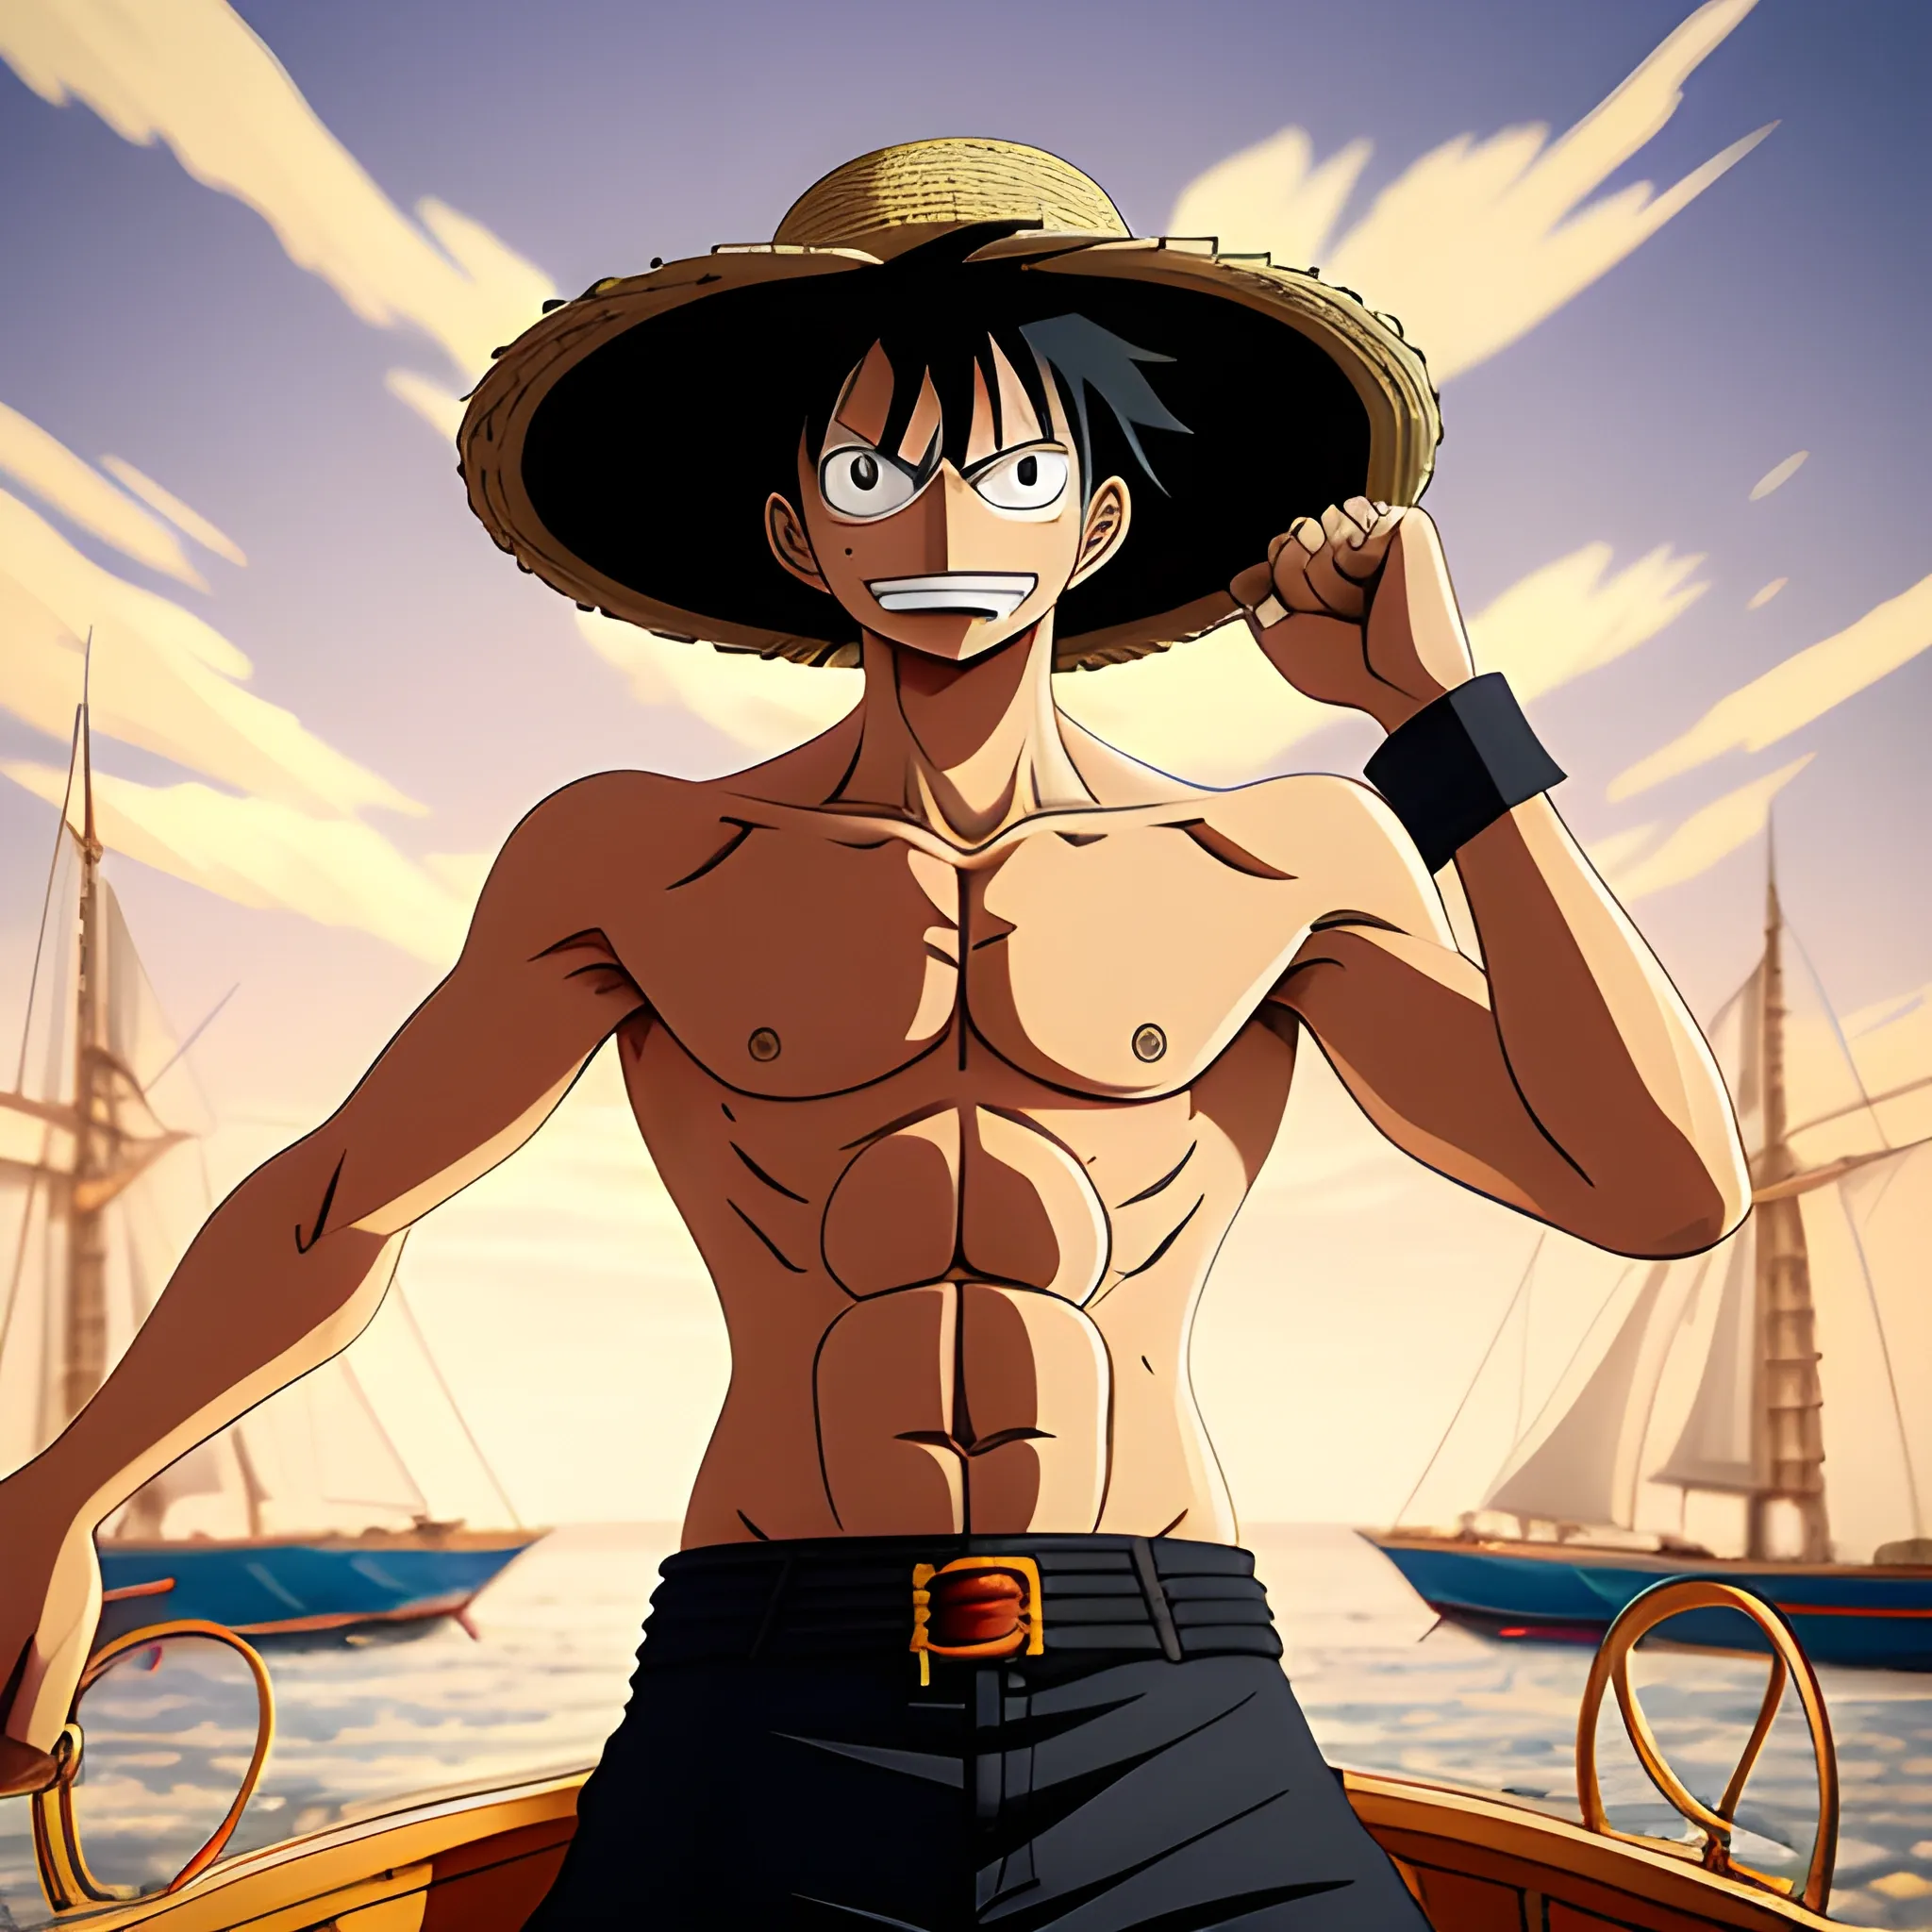 Lufy is a man in a fighting stance, with an intense, focused look on his face. His messy black hair and straw hat, ready to strike. In the background, you can see his boat and his traplation, suggesting that the scene takes place at night. The atmosphere is tense and exciting, as if Lufy is about to fight a powerful enemy. The image is created in a style of anime called One Piece, with crisp lines and shadows and vibrant colours. As for the camera, the image is shot from the bottom up, as if the viewer is looking at Lufy, in 3D. 